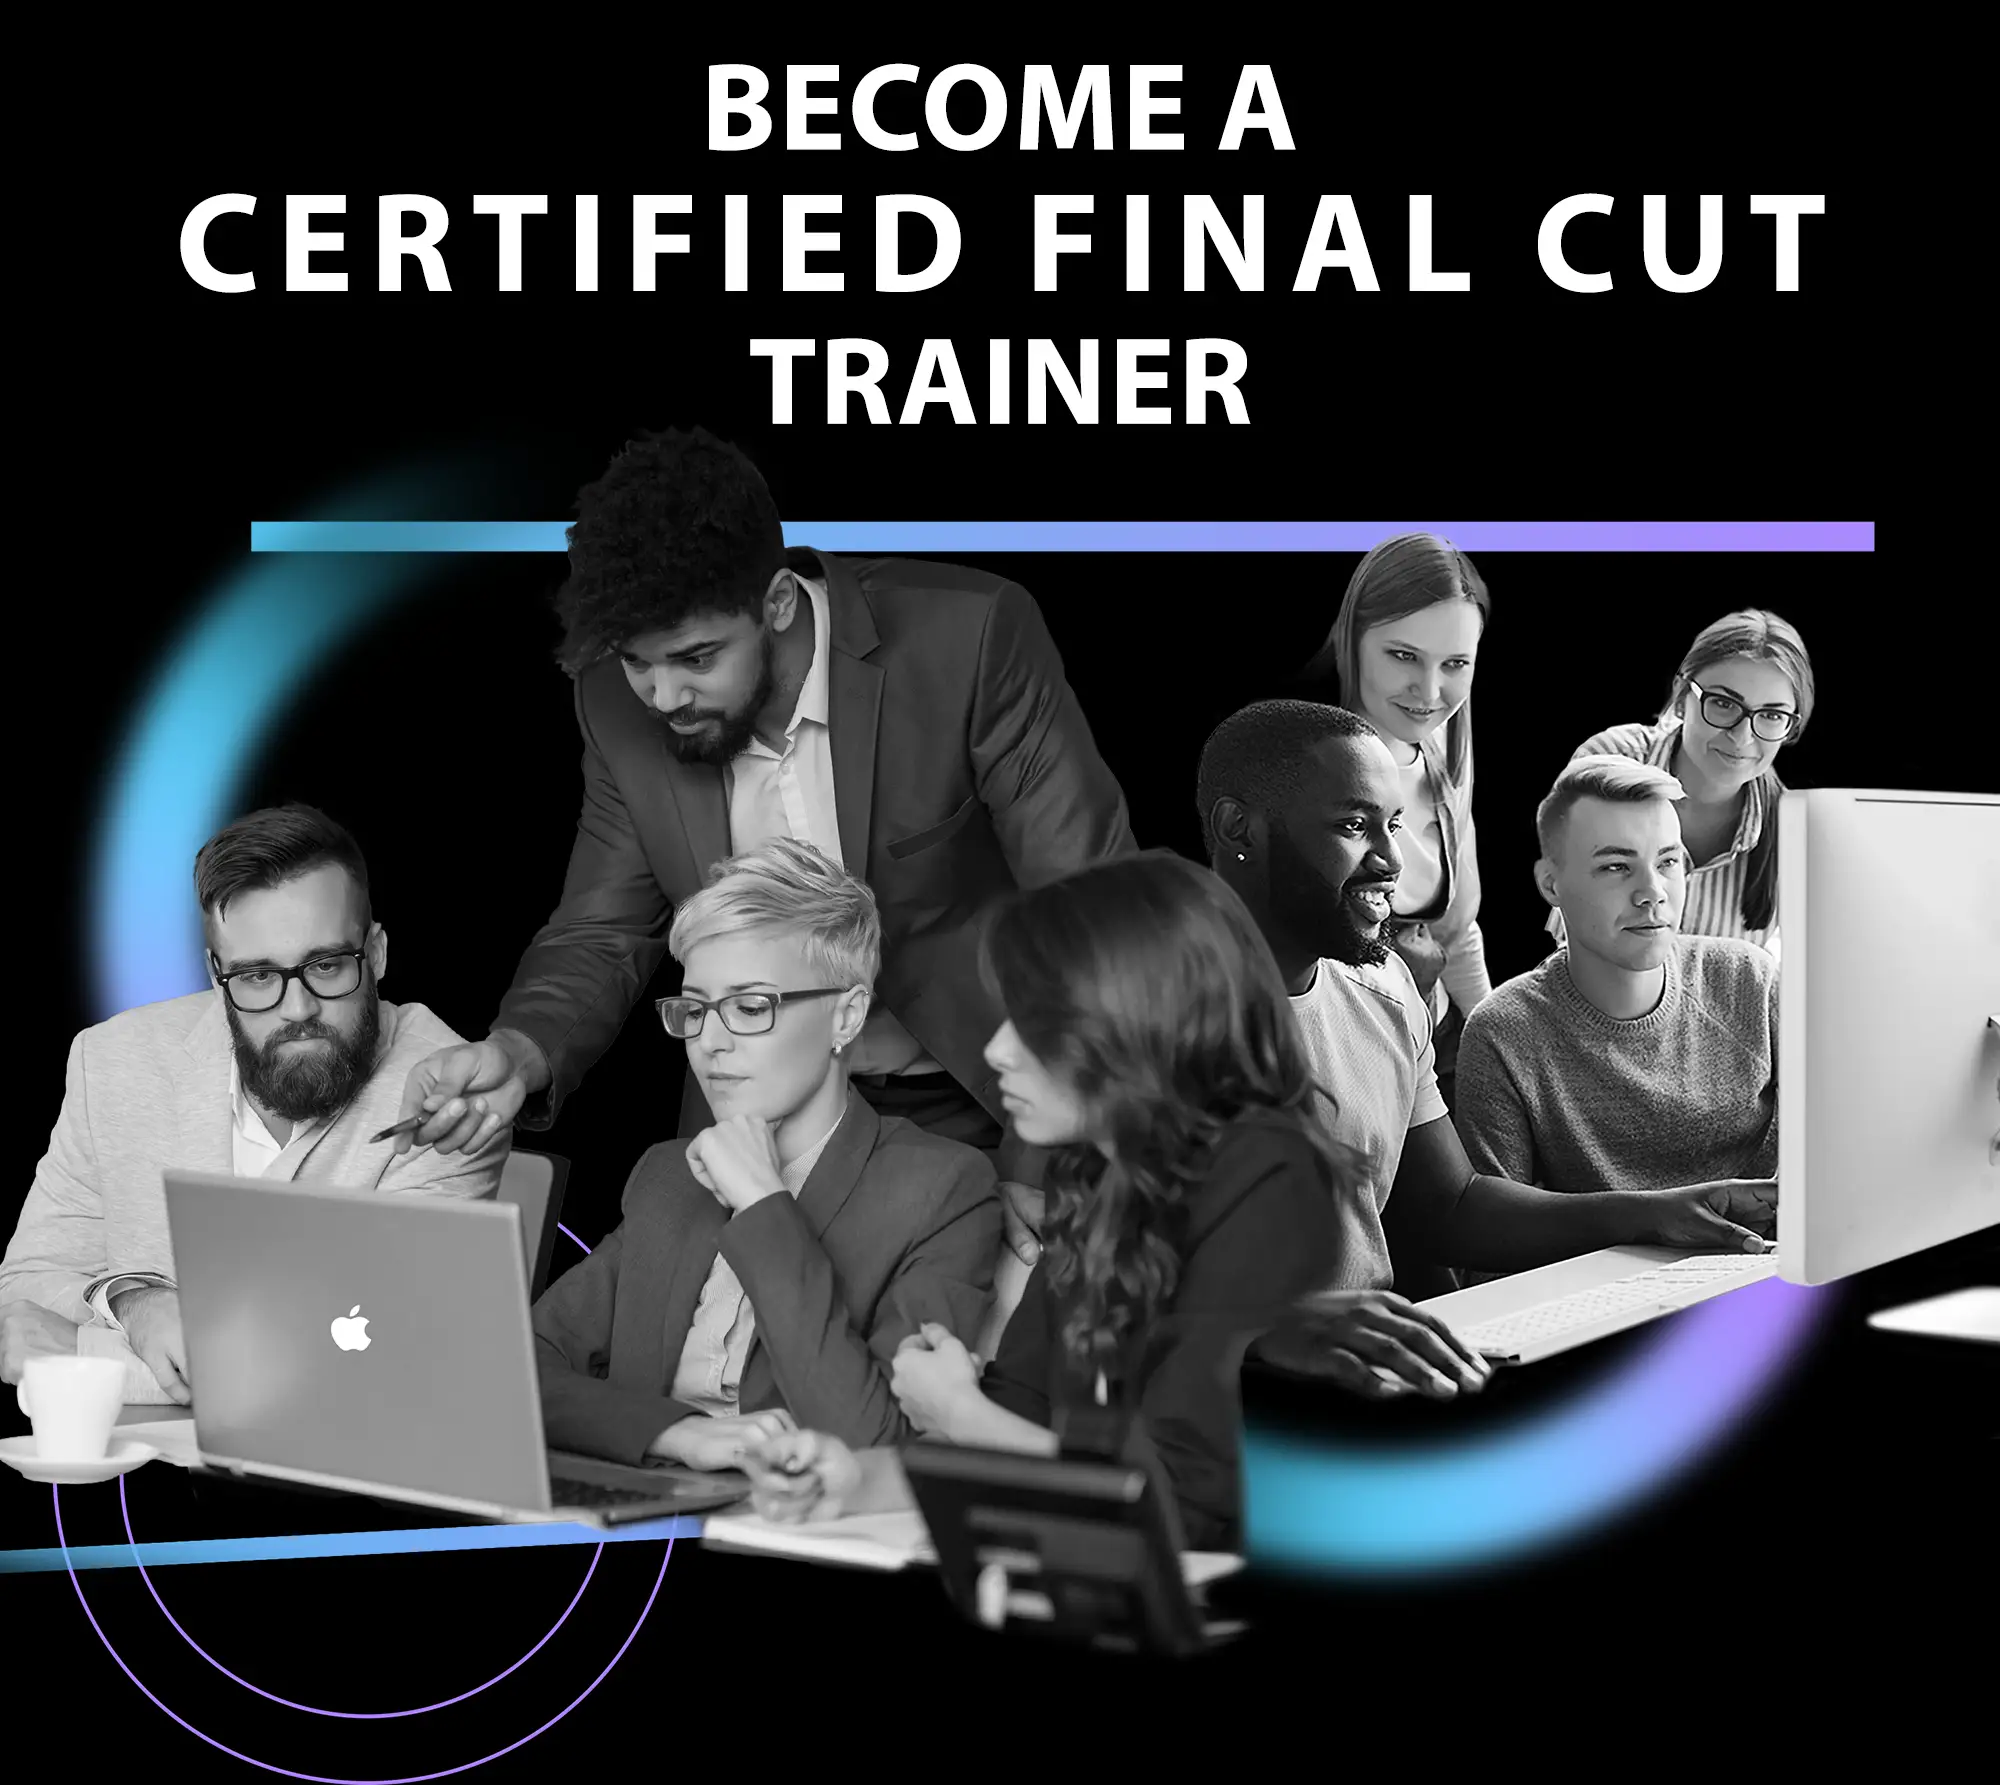 Become a Certified Final Cut Trainer - image collage